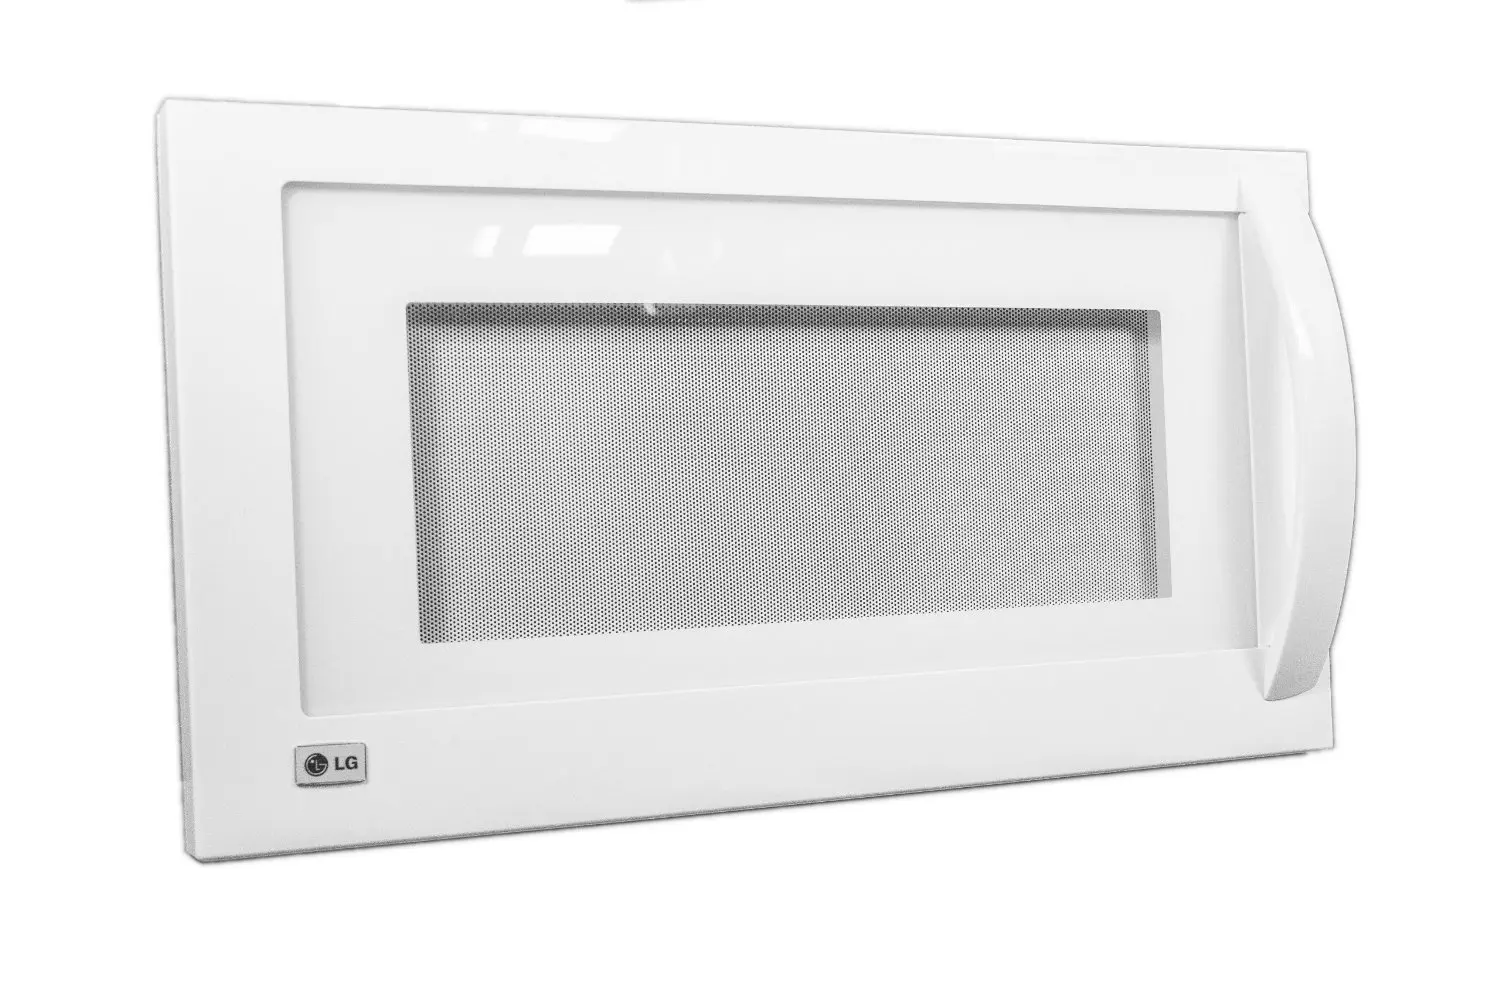 Buy LG Electronics ADC34753818 Microwave Oven Door Assembly in Cheap Price on